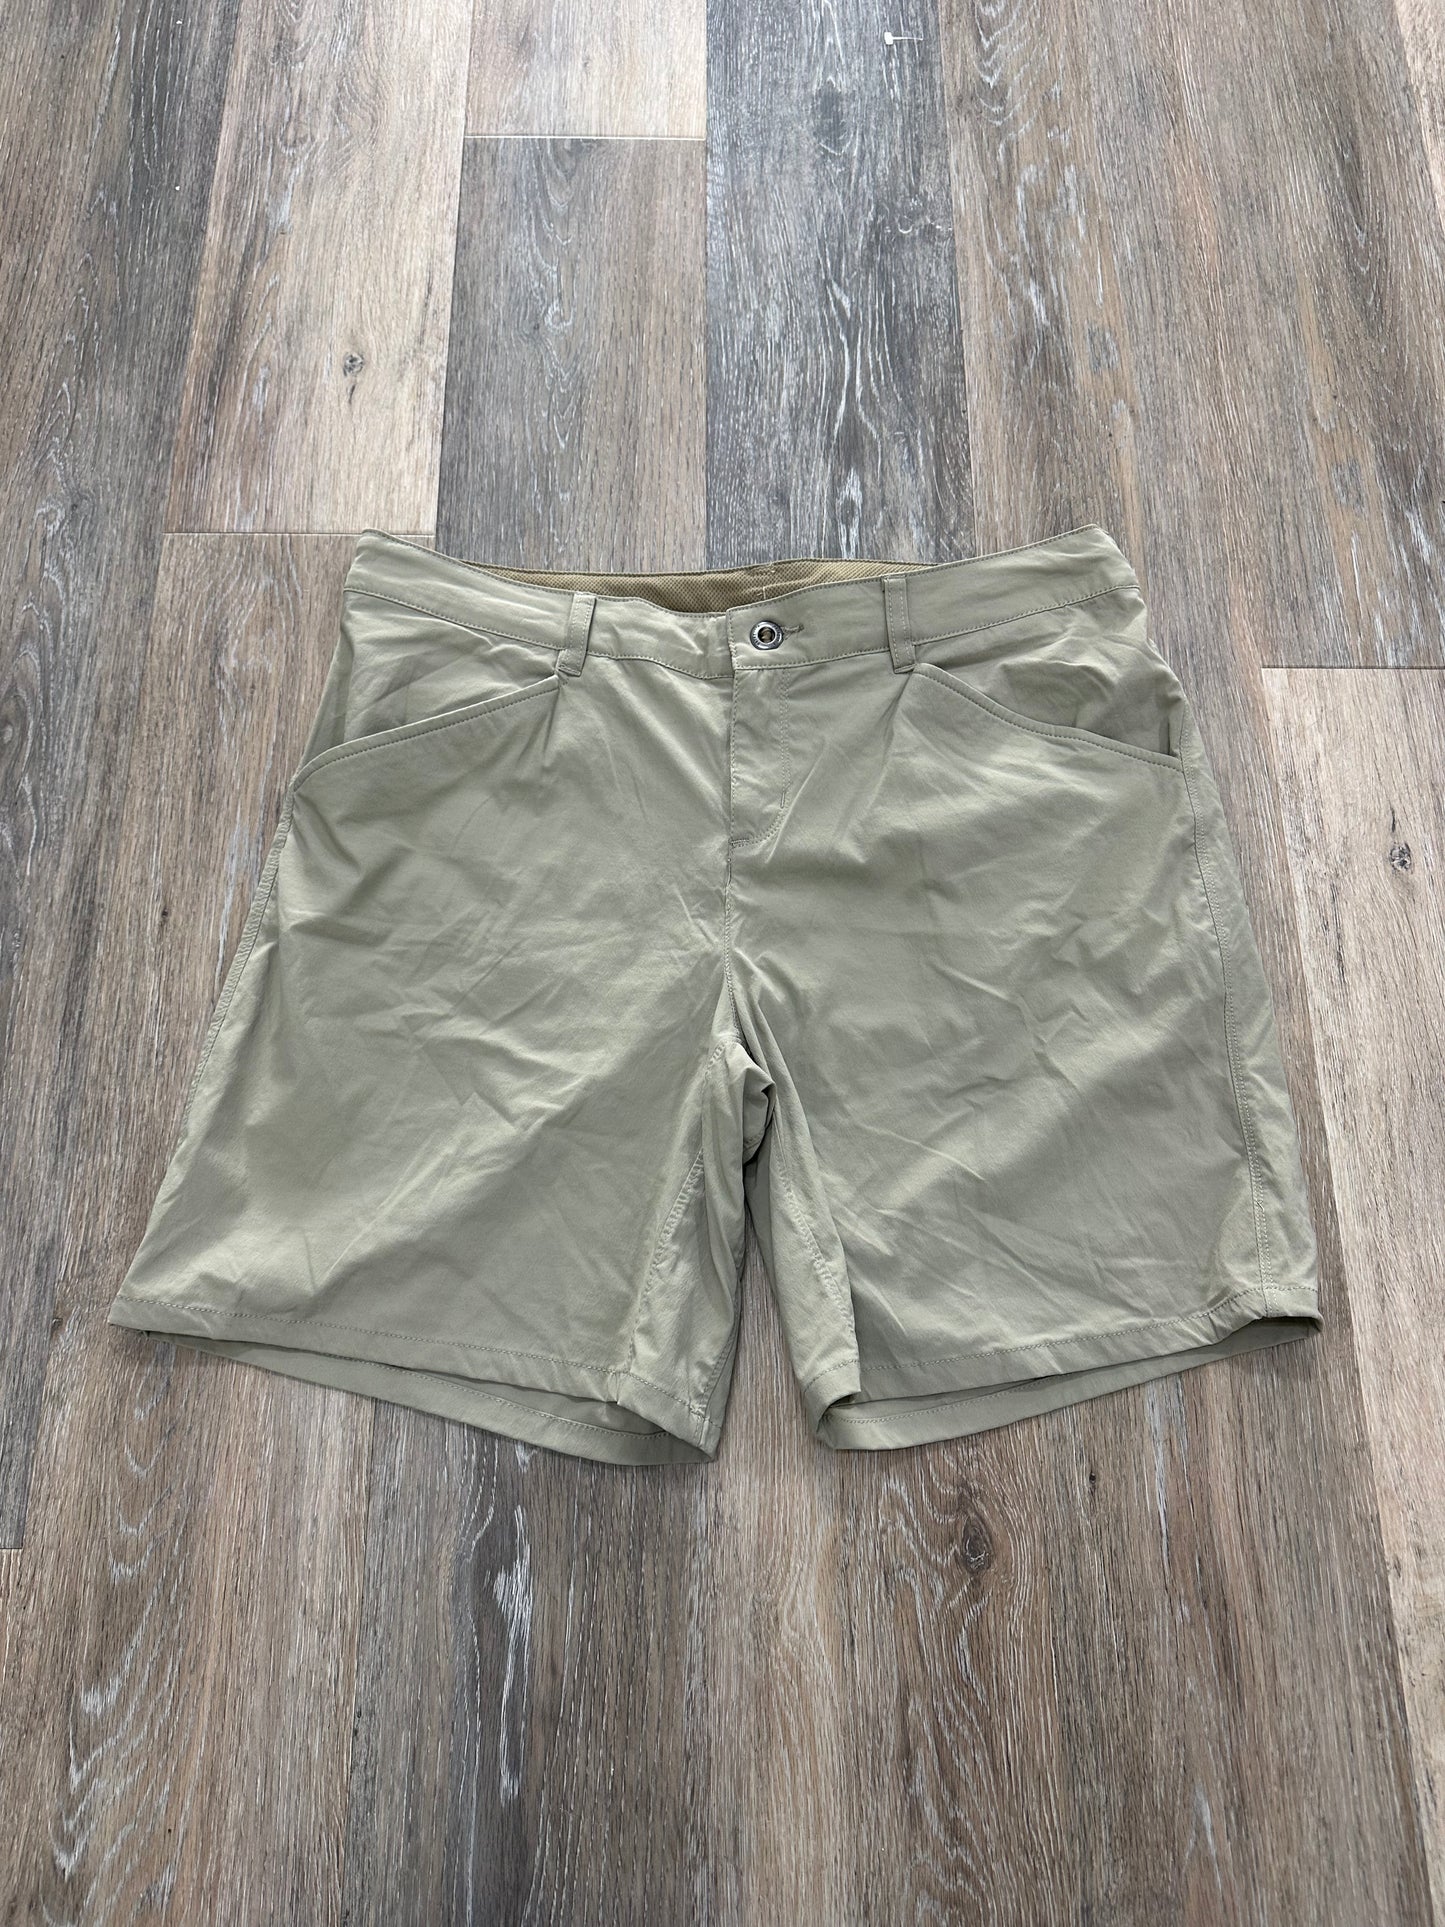 Athletic Shorts By Patagonia  Size: 10